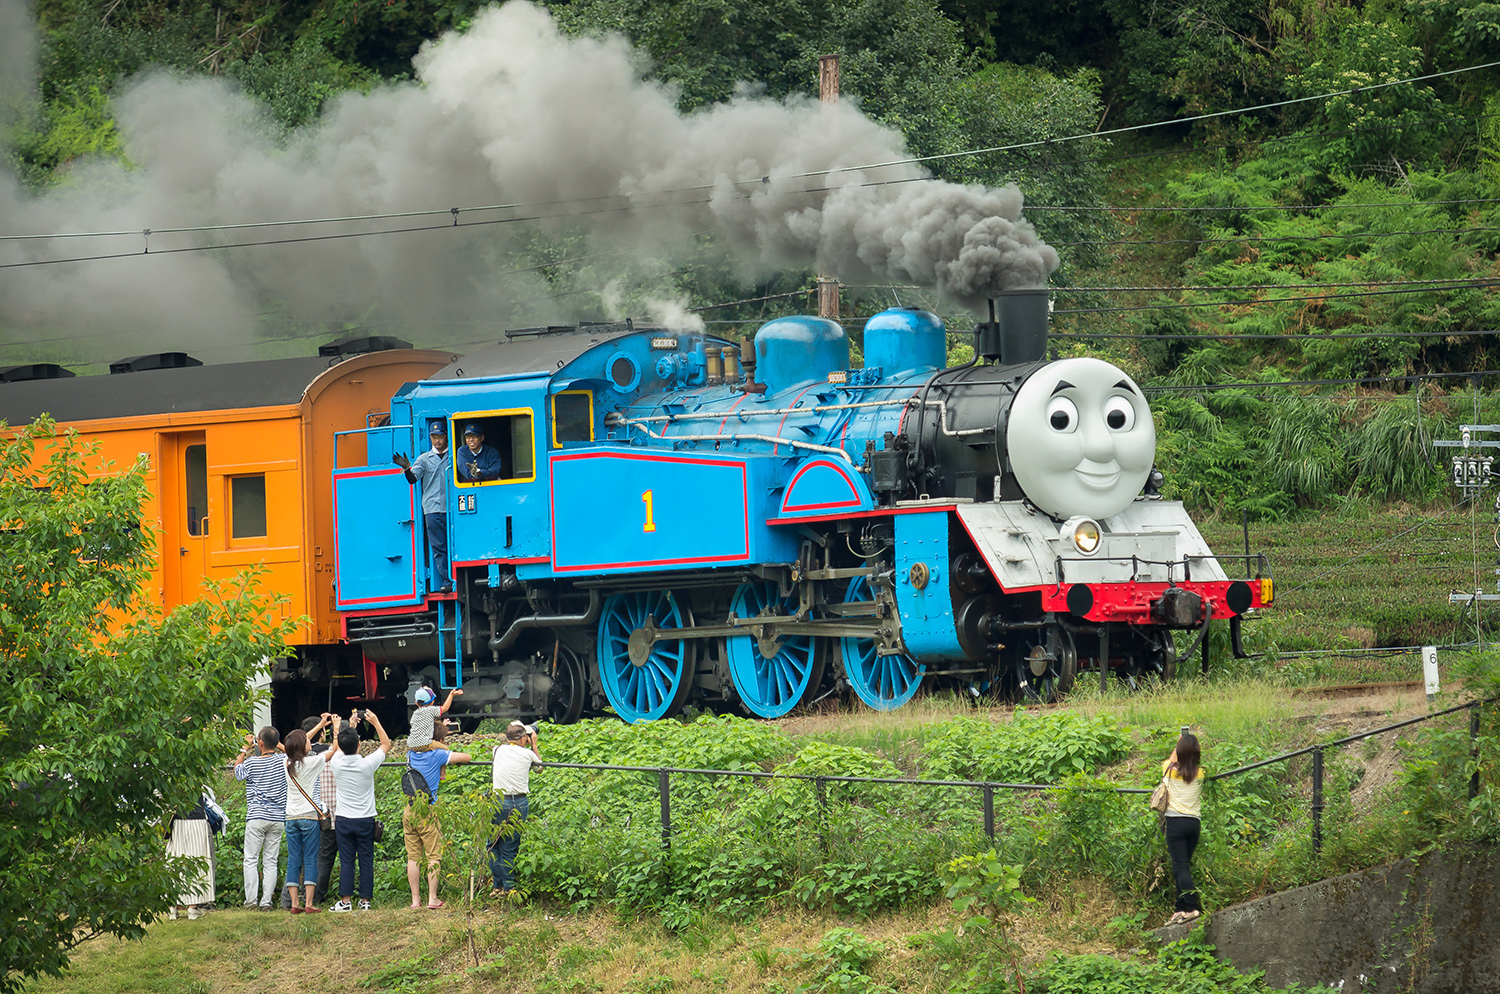 You can now ride a real Thomas the Tank Engine train in Japan